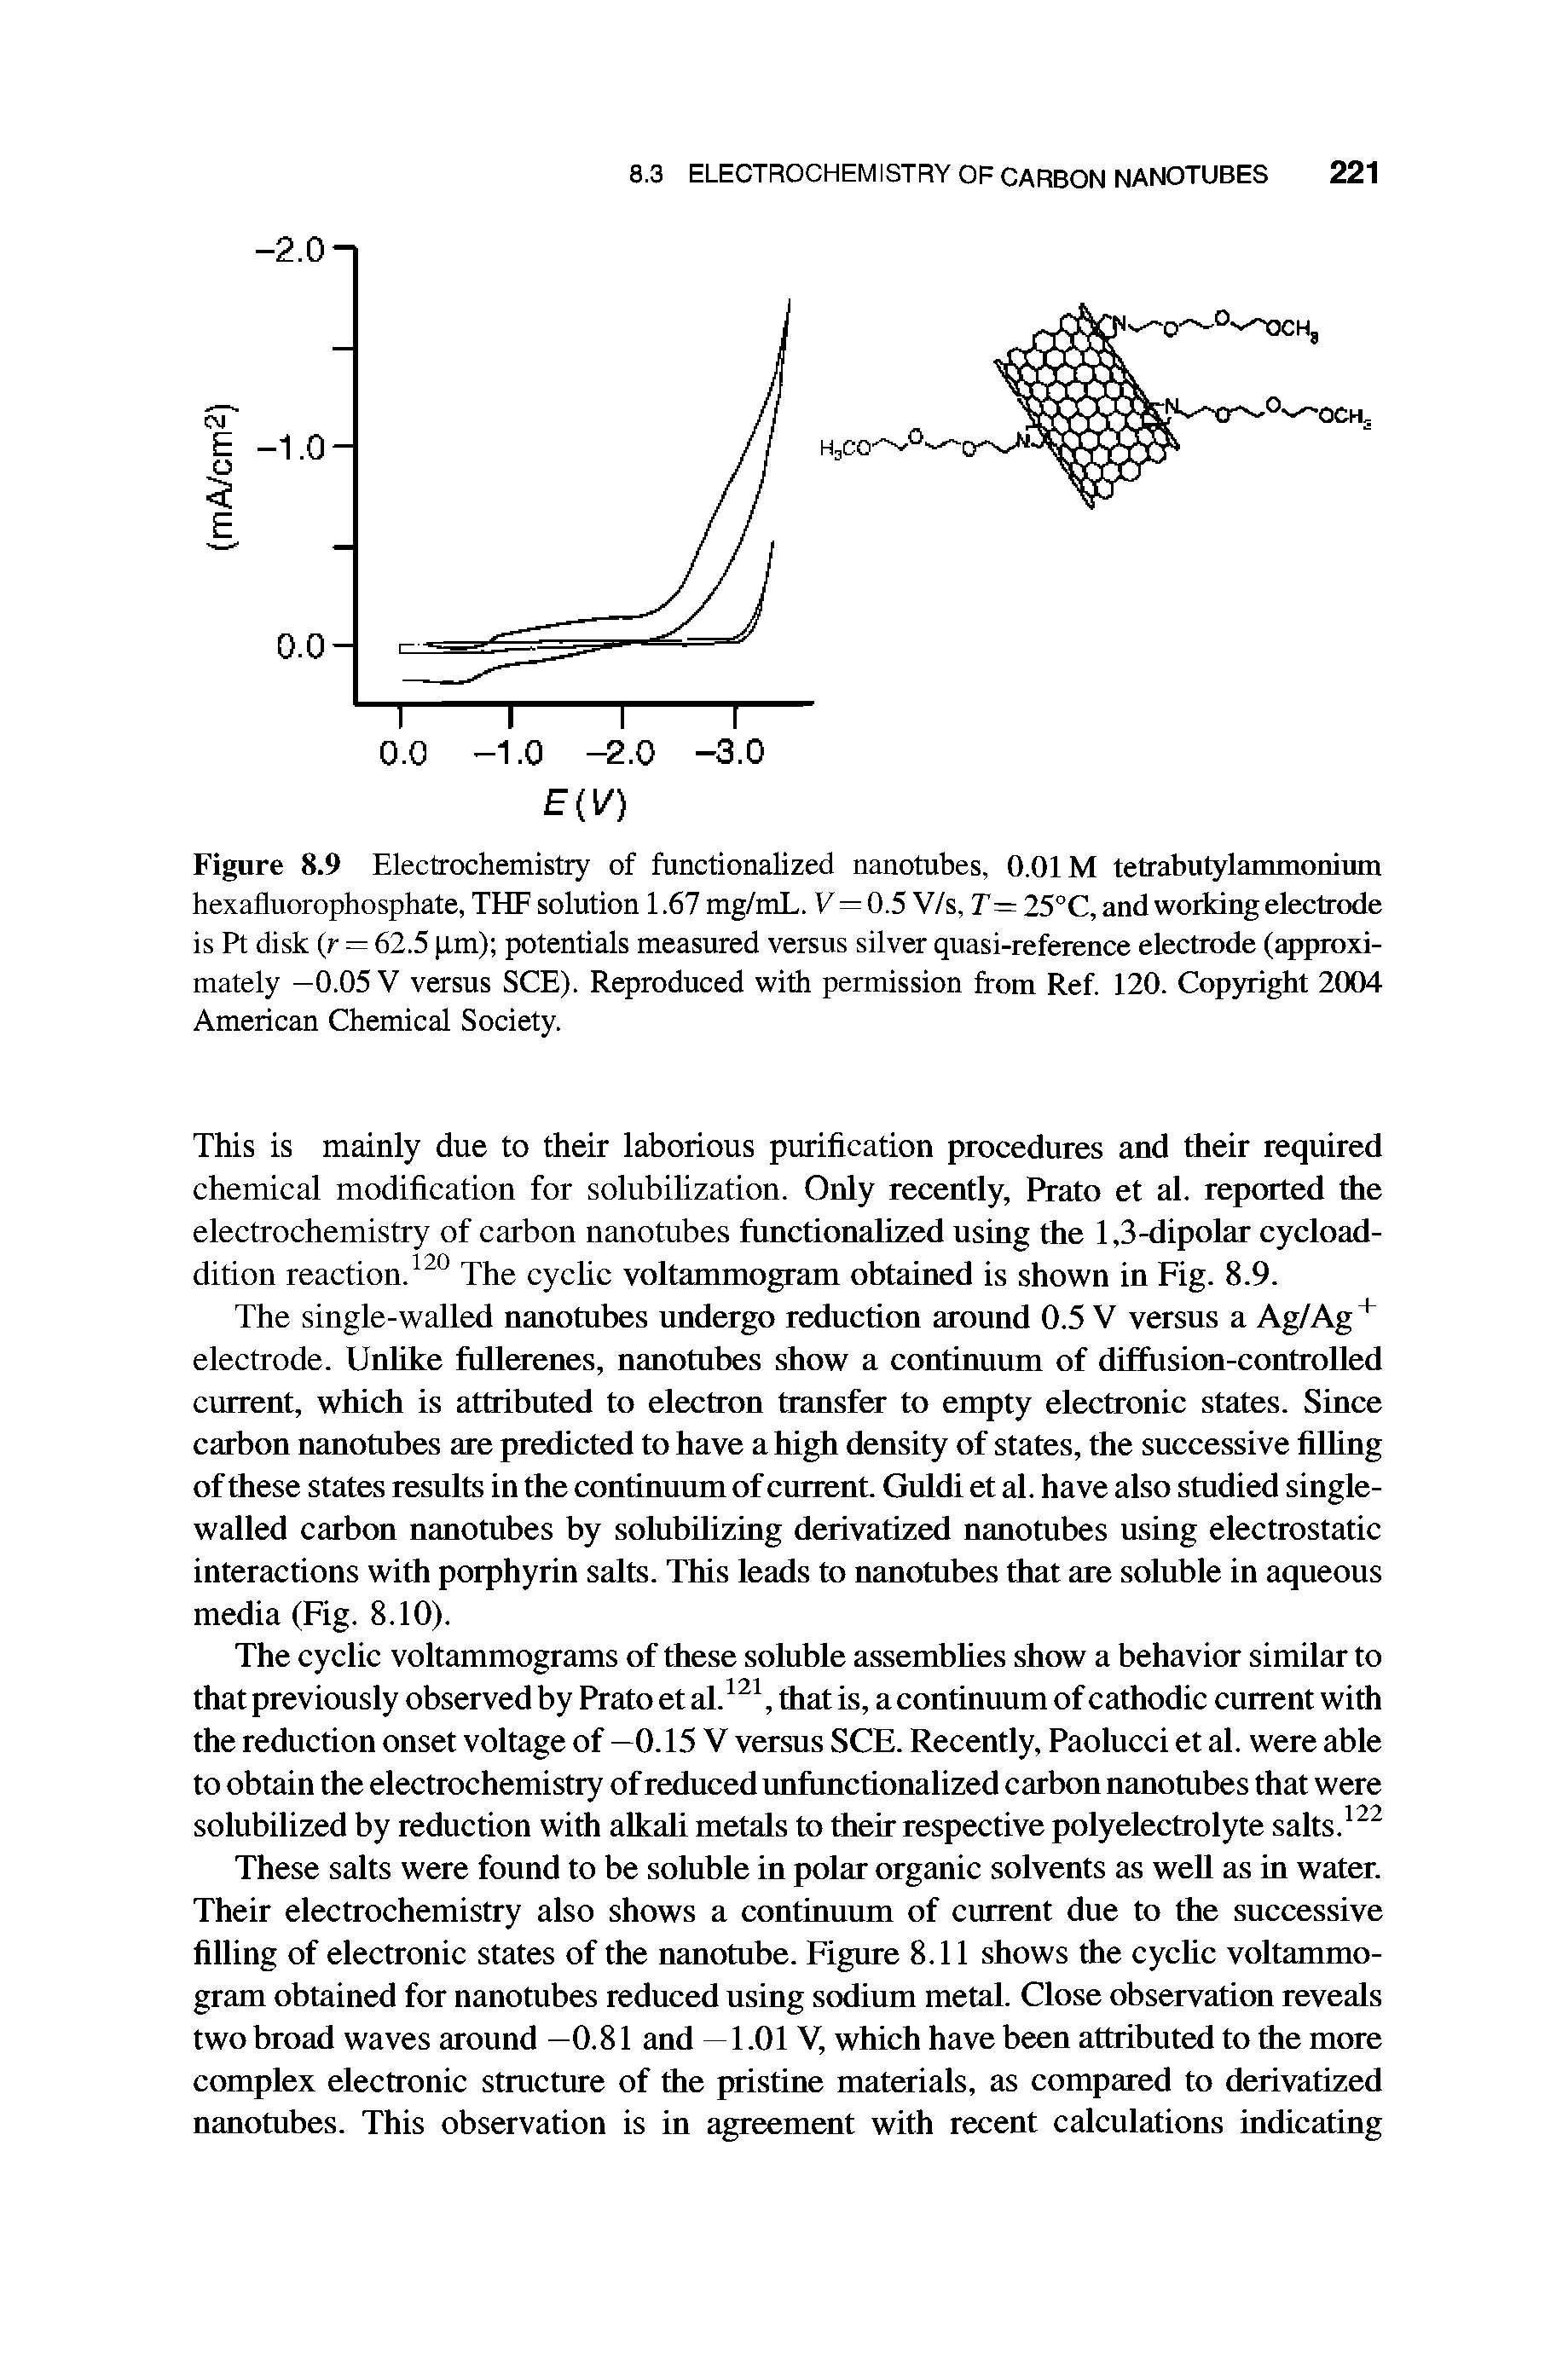 Figure 8.9 Electrochemistry of functionalized nanotubes, 0.01 M tetrabutylammonium hexafhiorophosphate, THF solution 1.67 mg/mL. V—0.5 V/s. 7 — 25°C, and working electrode is Pt disk (r — 62.5 pm) potentials measured versus silver quasi-reference electrode (approximately —0.05 V versus SCE). Reproduced with permission from Ref. 120. Copyright 2004 American Chemical Society.